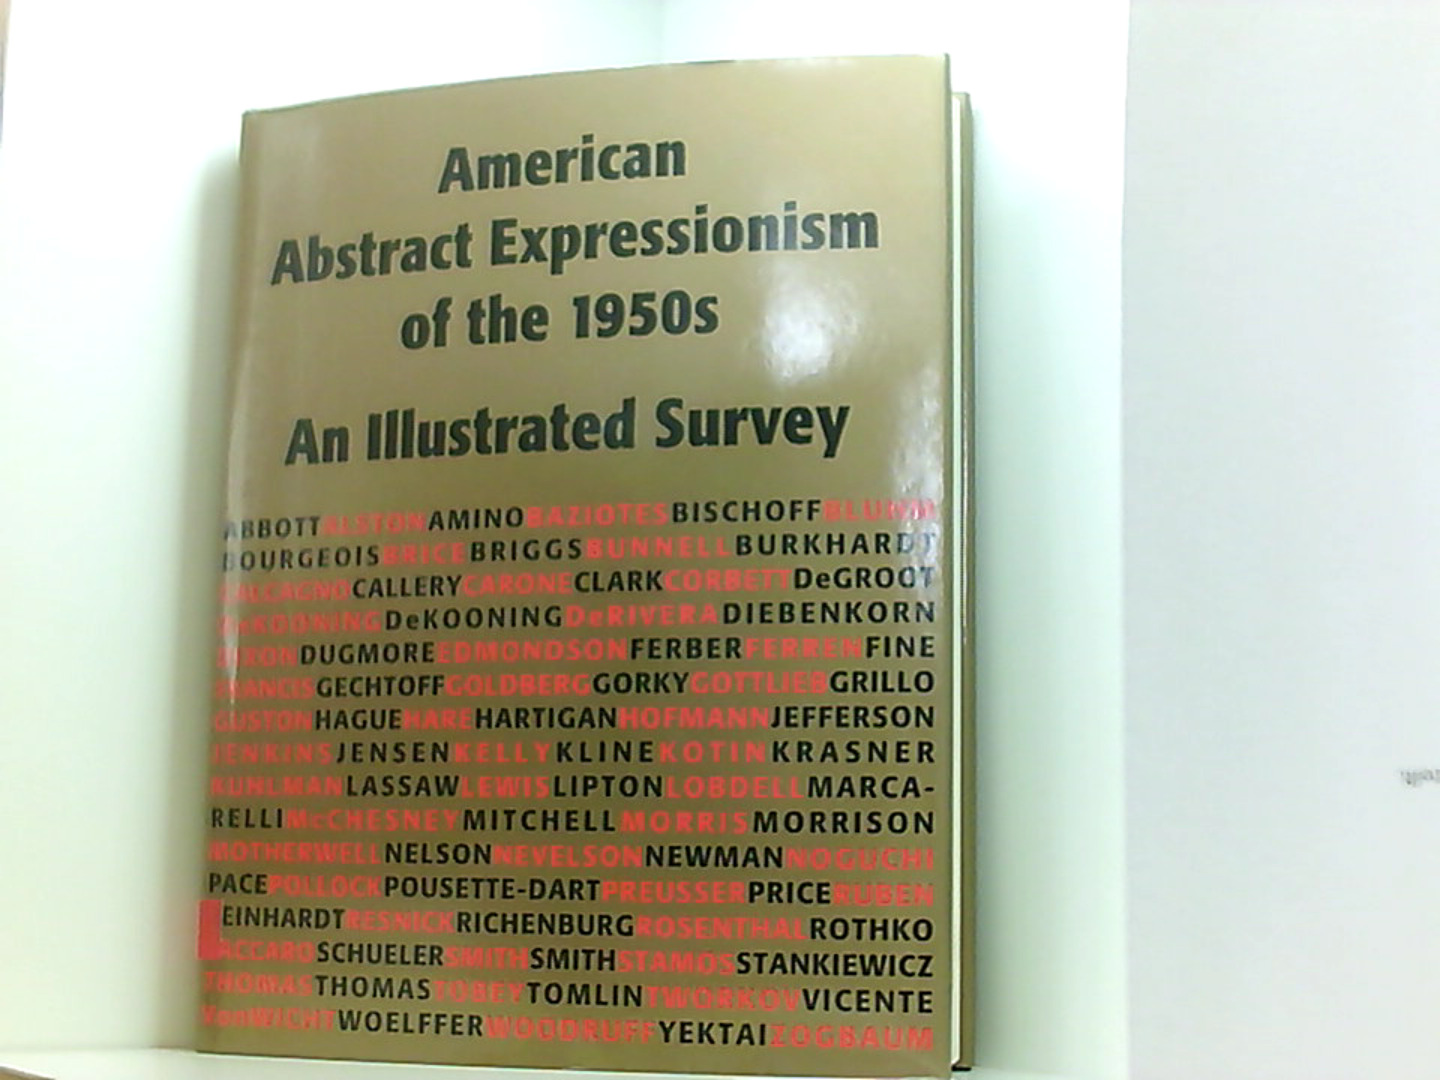 American Abstract Expressionism of the 1950s: An Illustrated Survey With Artists' Statements, Artwork, and Biographies - Herskovic, Marika